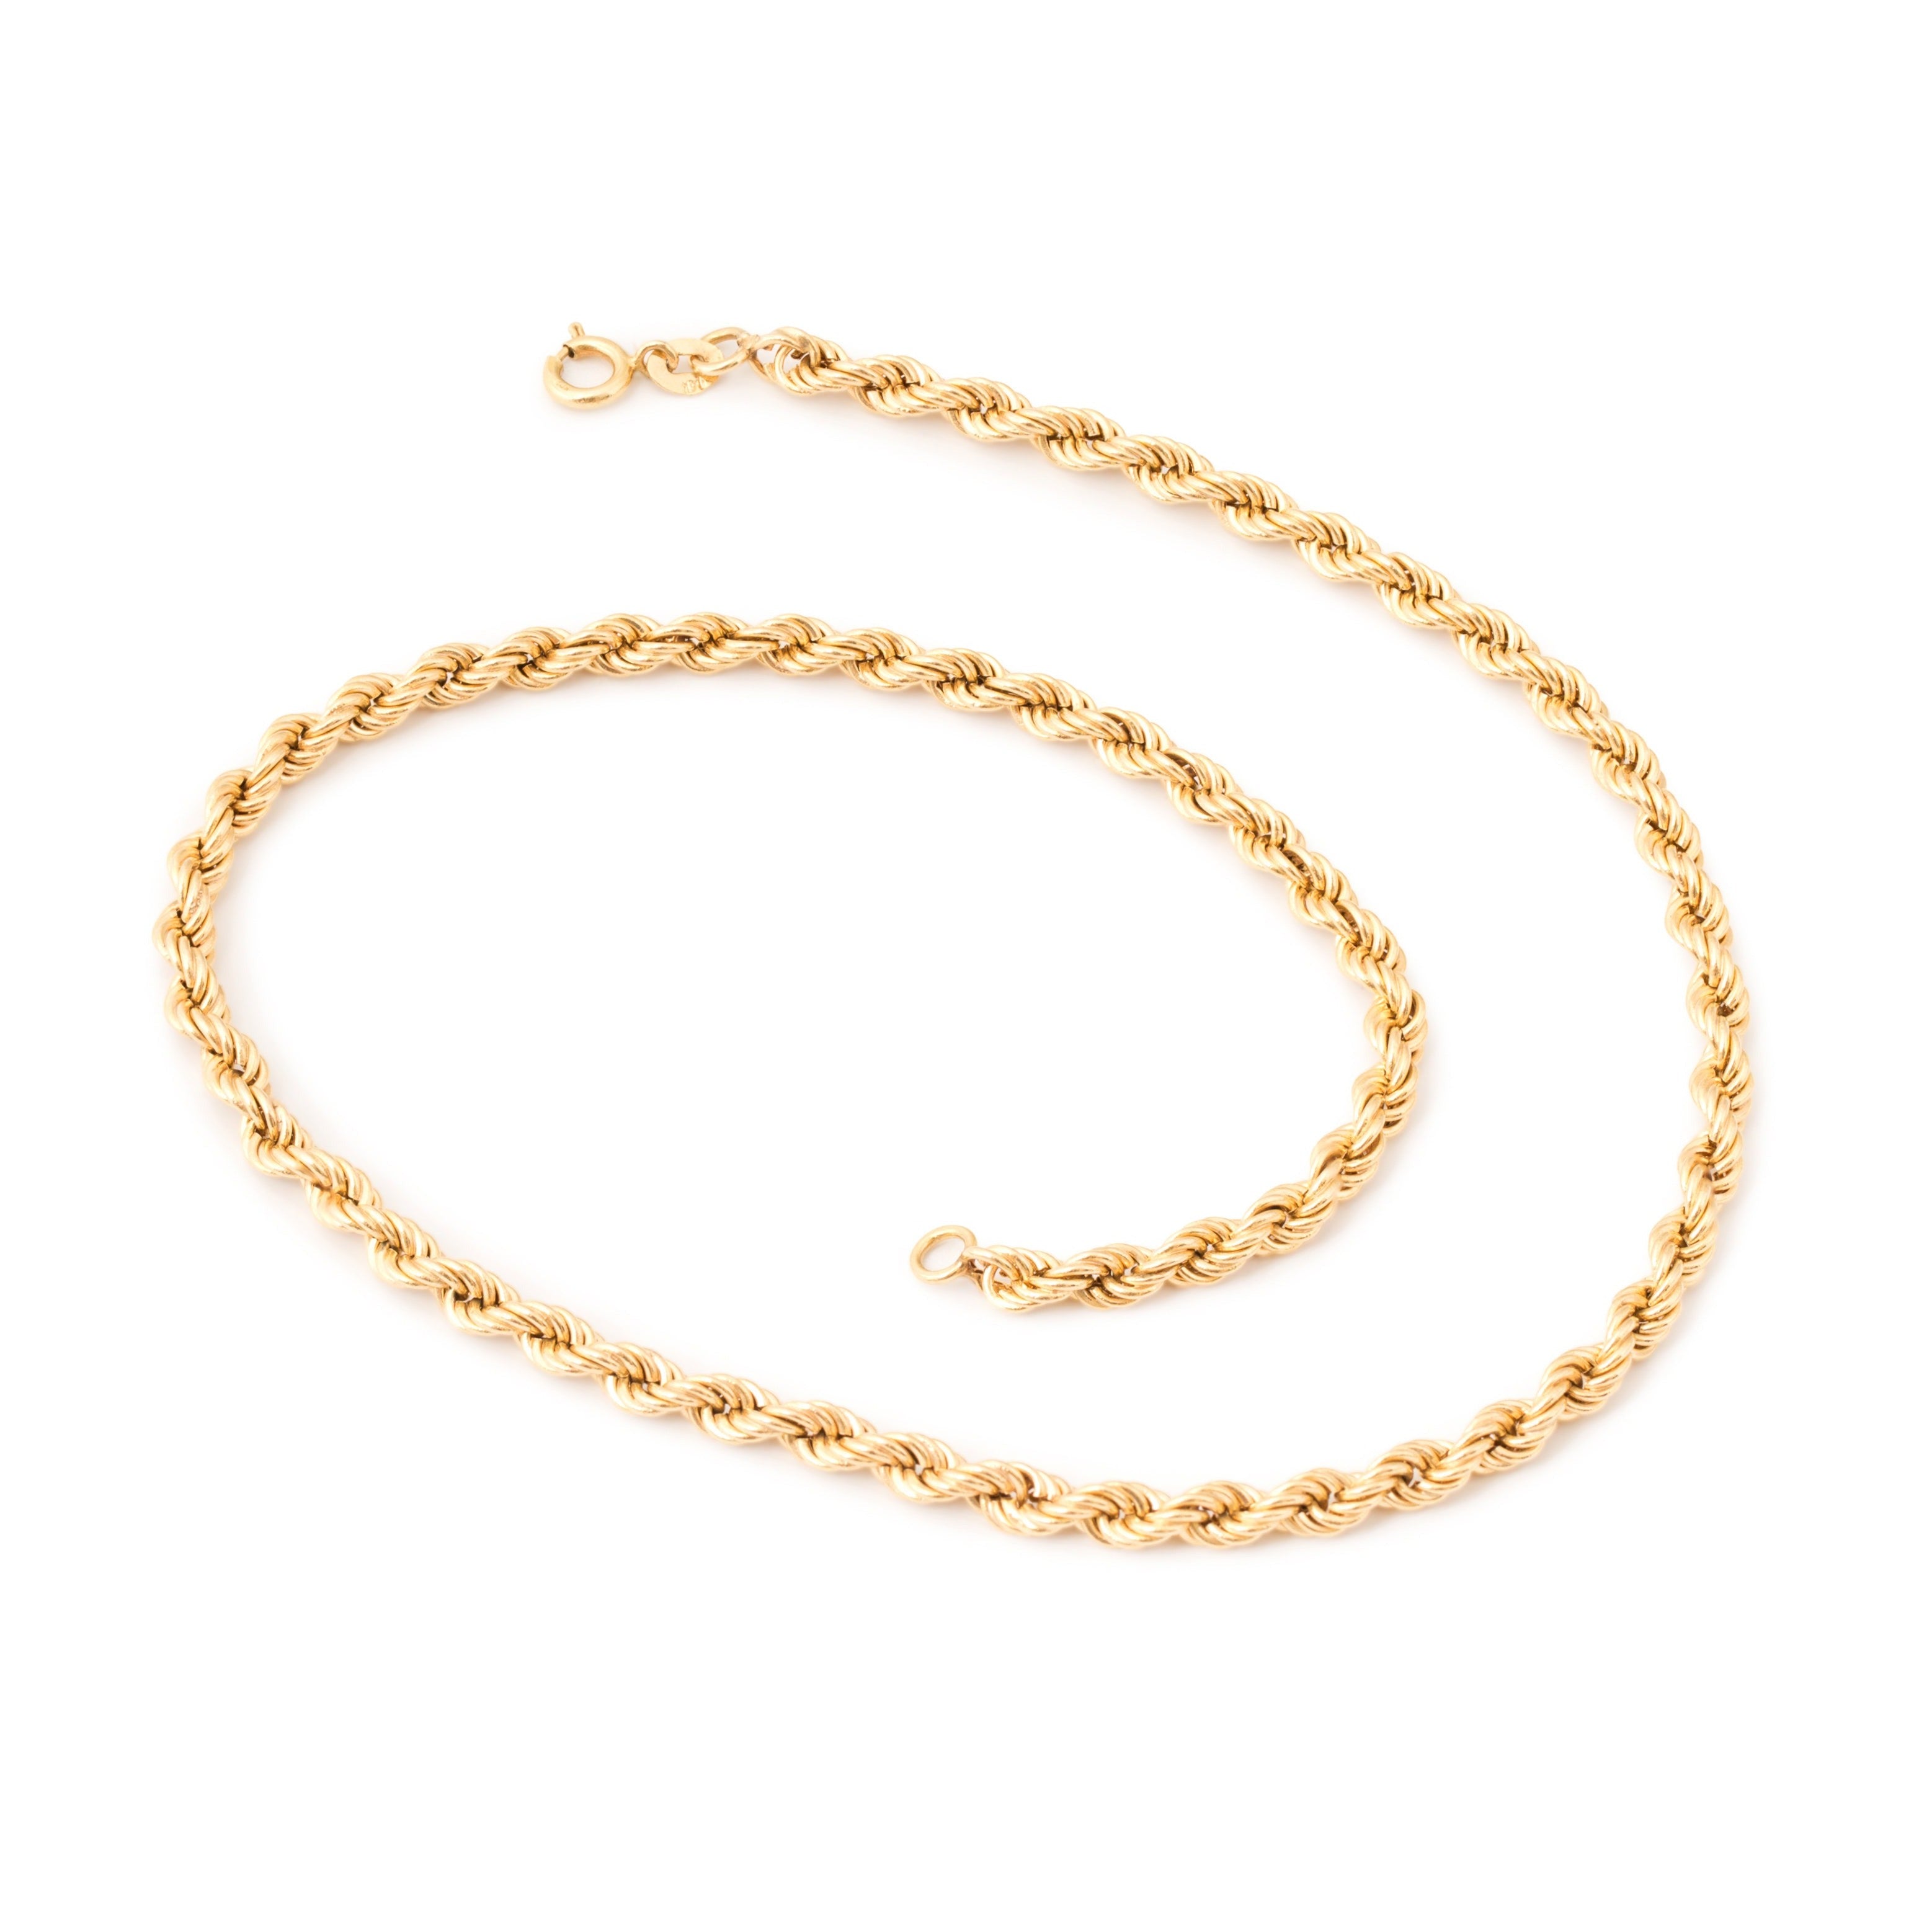 Roped 14k Gold 15" Chain Necklace